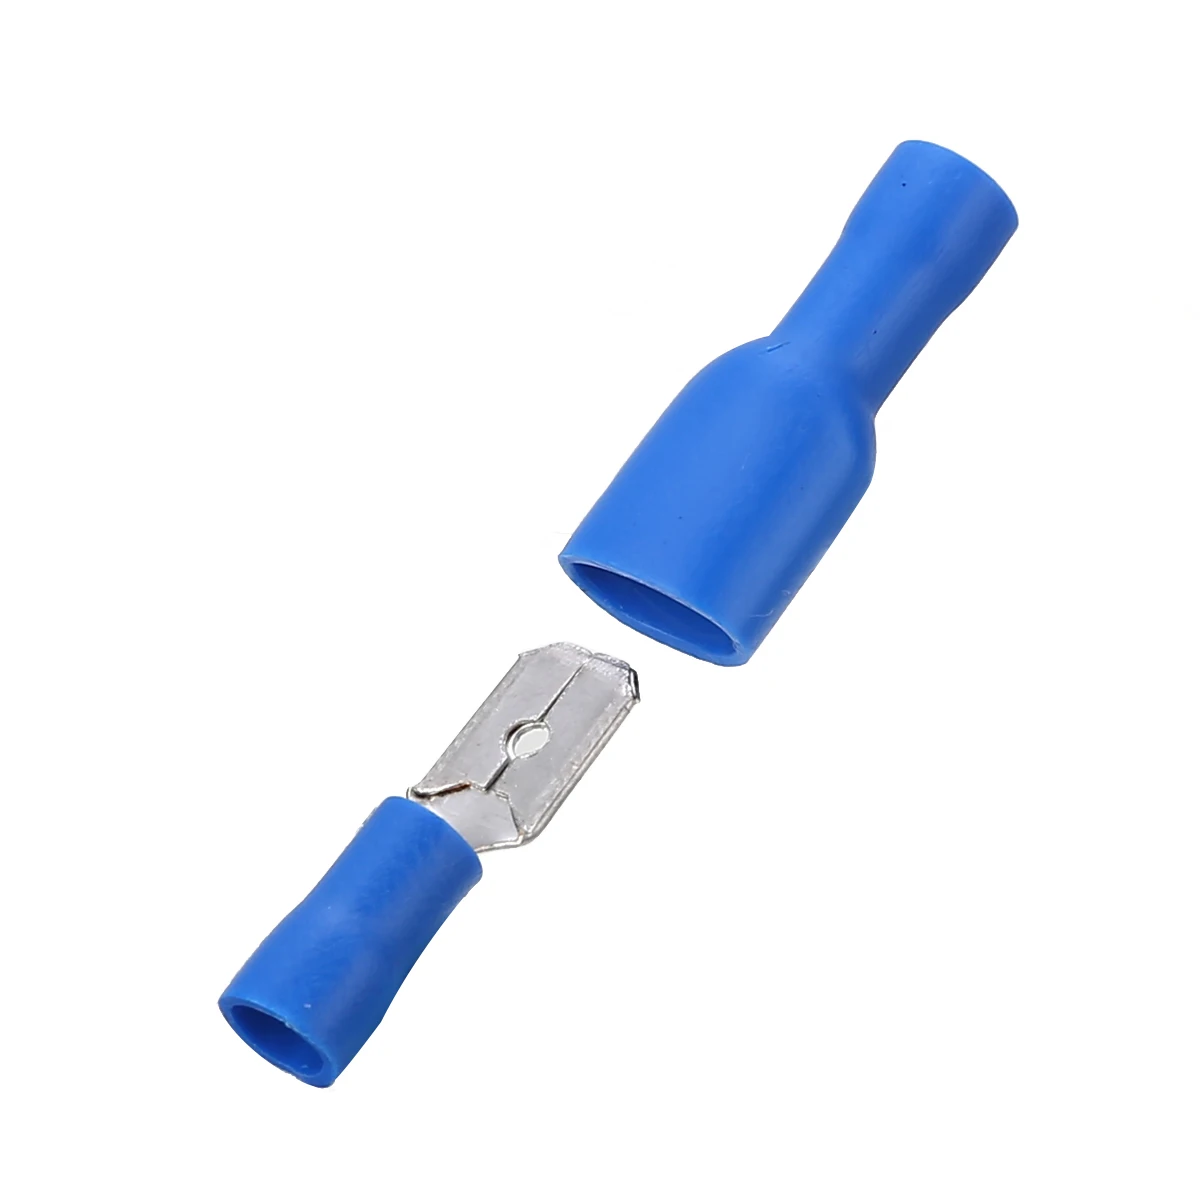 100 x blue spade connectors insulated crimp terminals for audiowires &electrical 